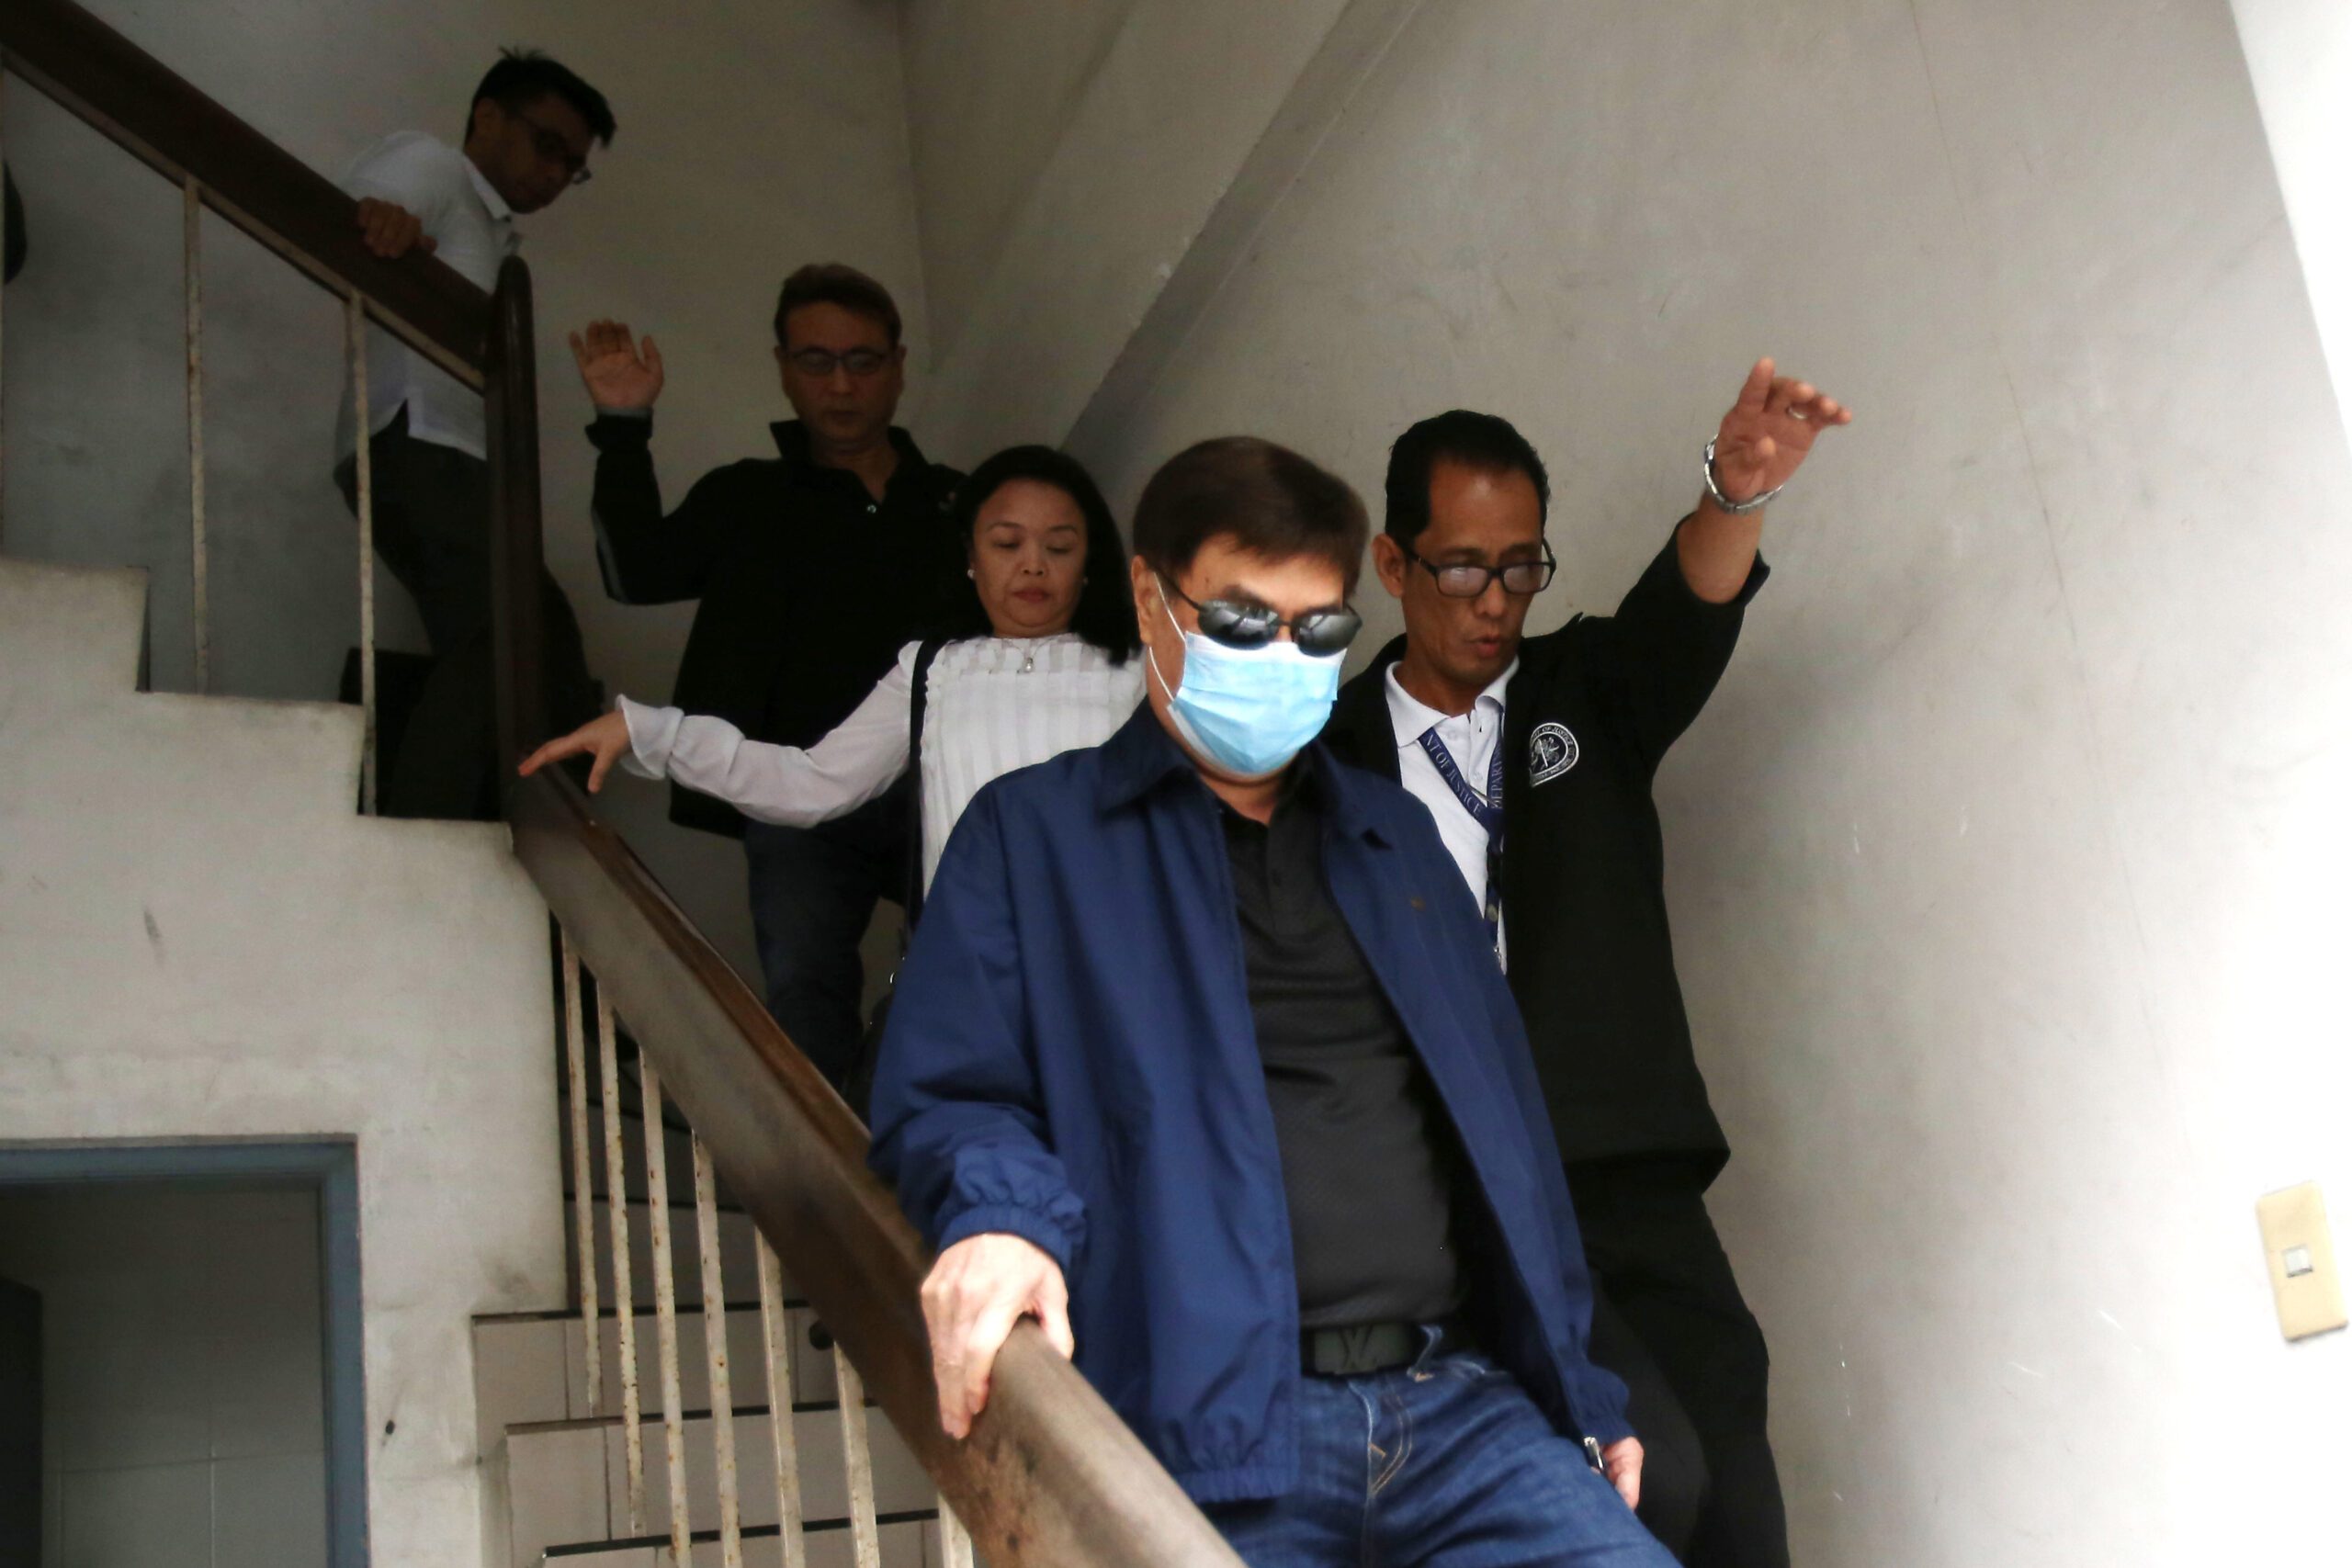 Peter Lim shows up at DOJ on prosecutor’s orders